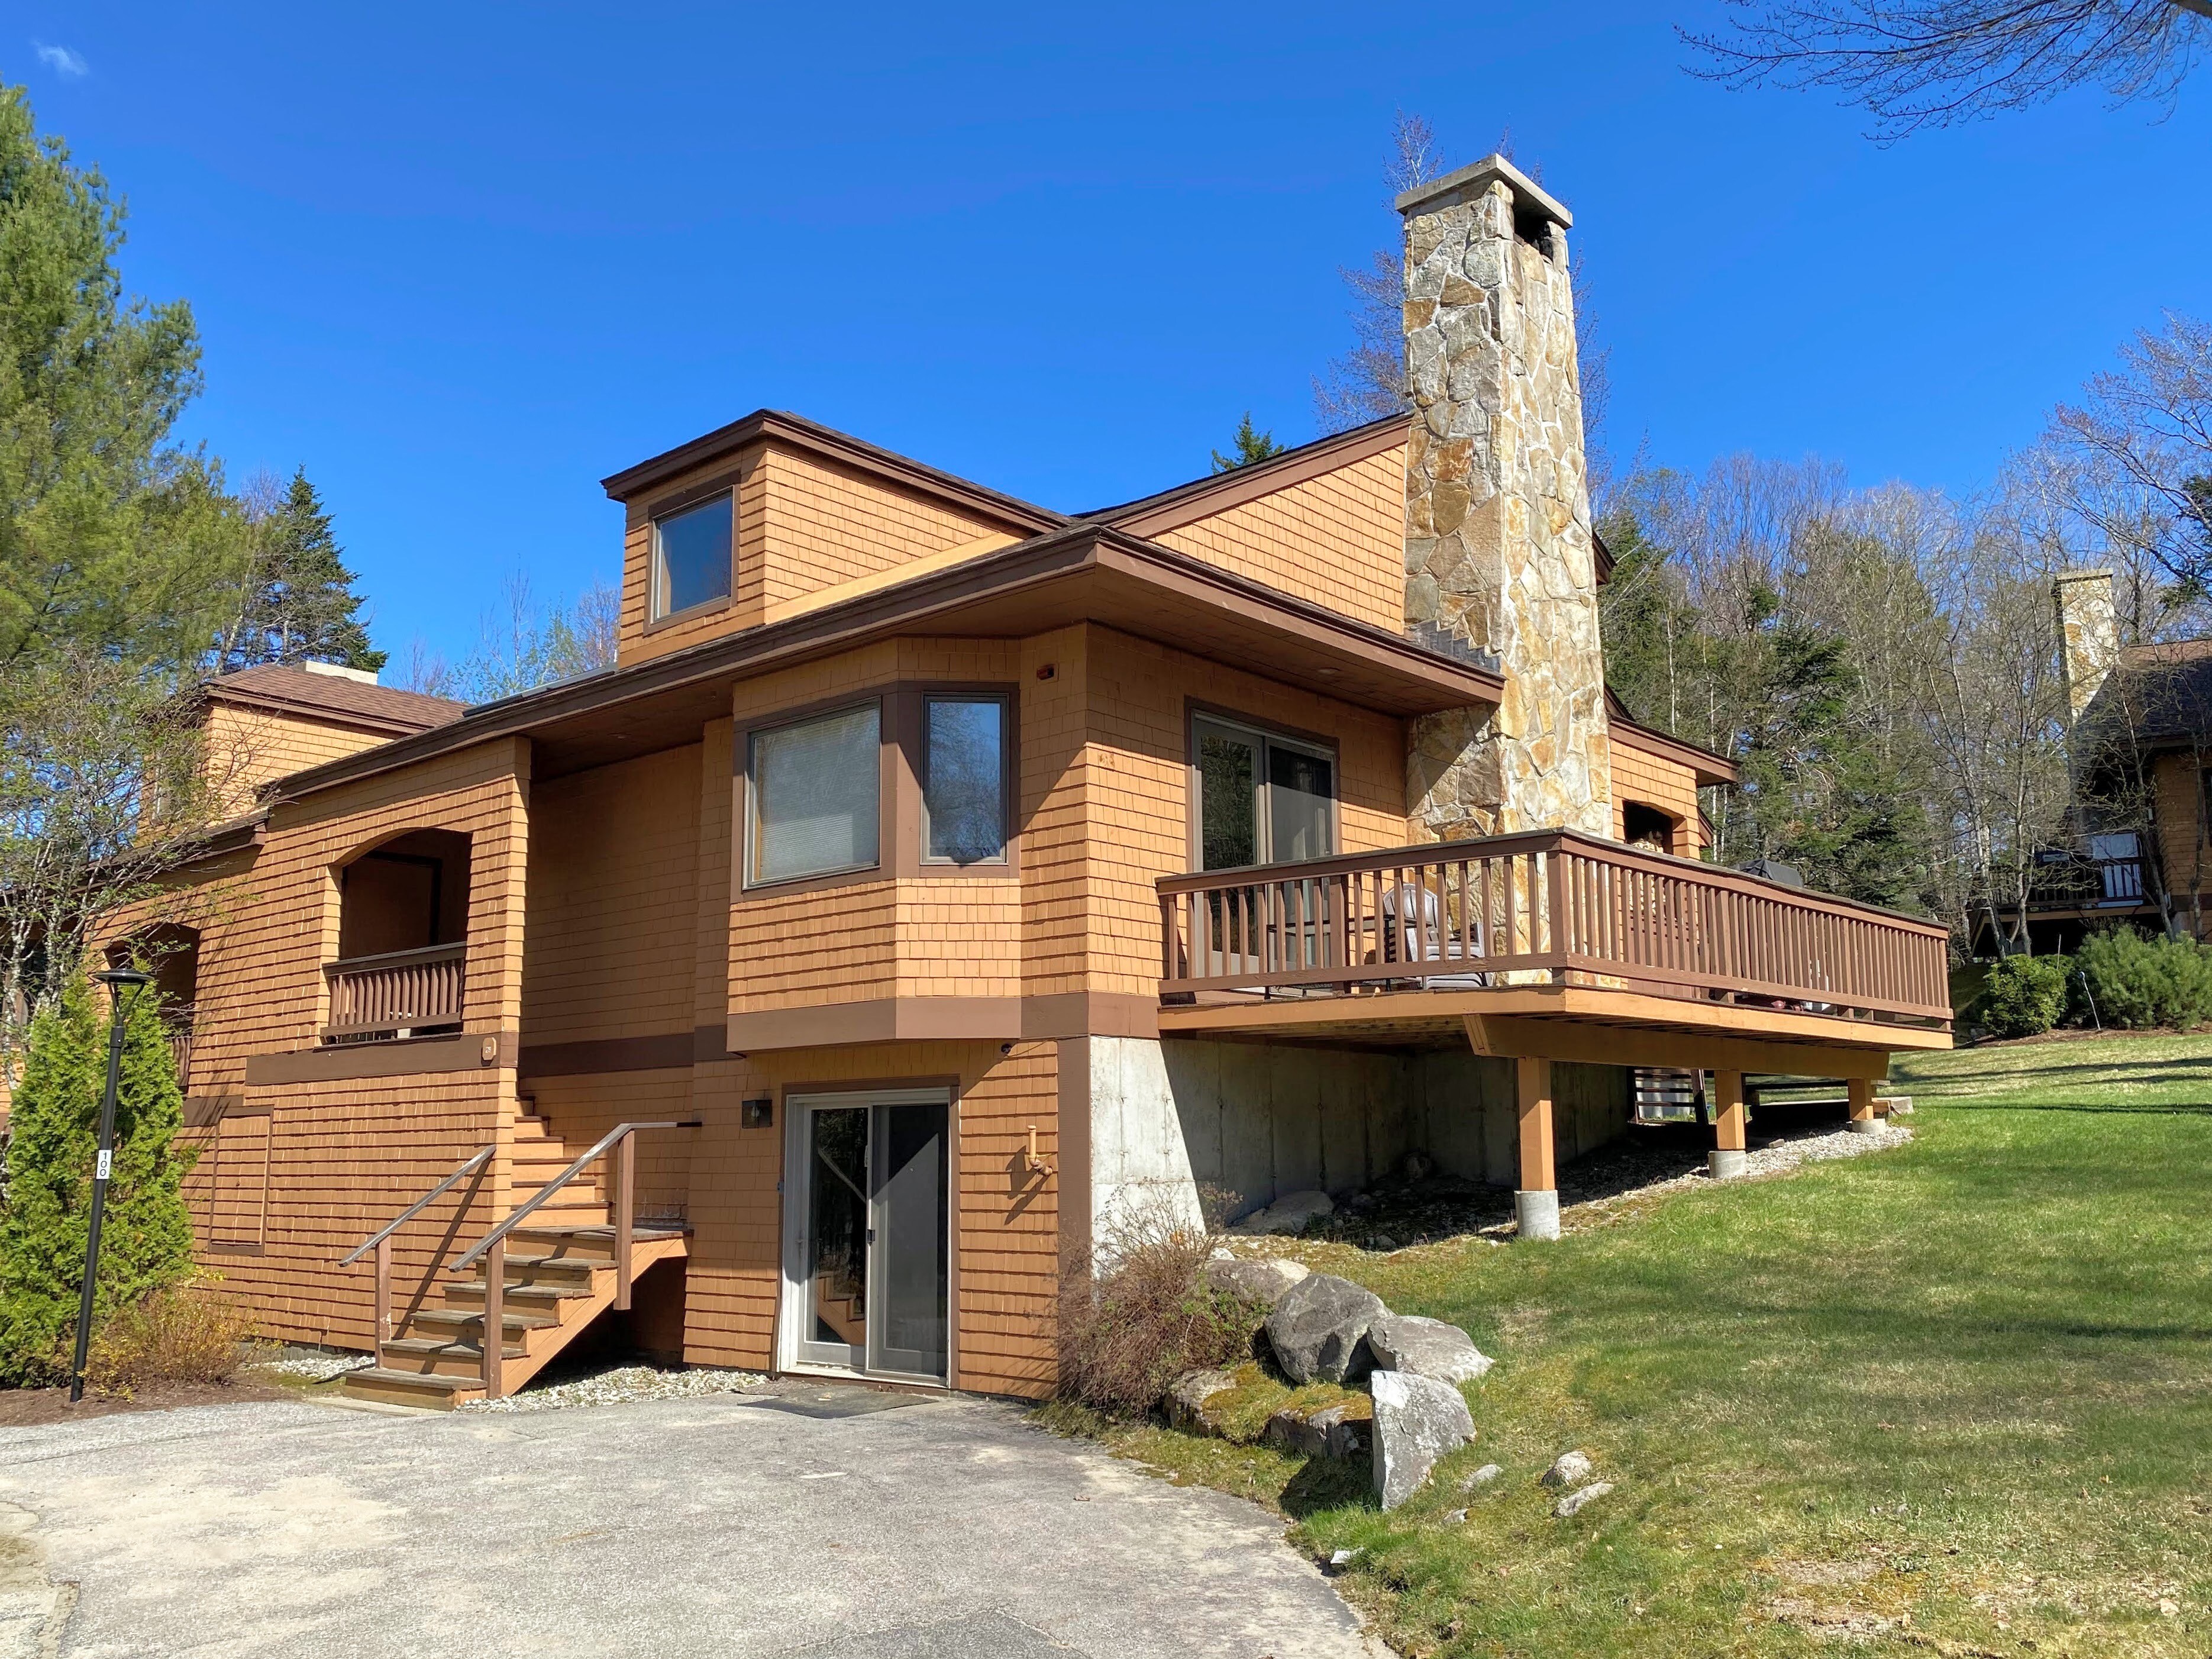 Air Conditioning Just Added! Remodeled and updated with granite countertops, hardwood floors and new bathrooms, this home stands out as stylish and light-filled contemporary compared to most other Forest Cottage homes. With ample sleeping space and multip